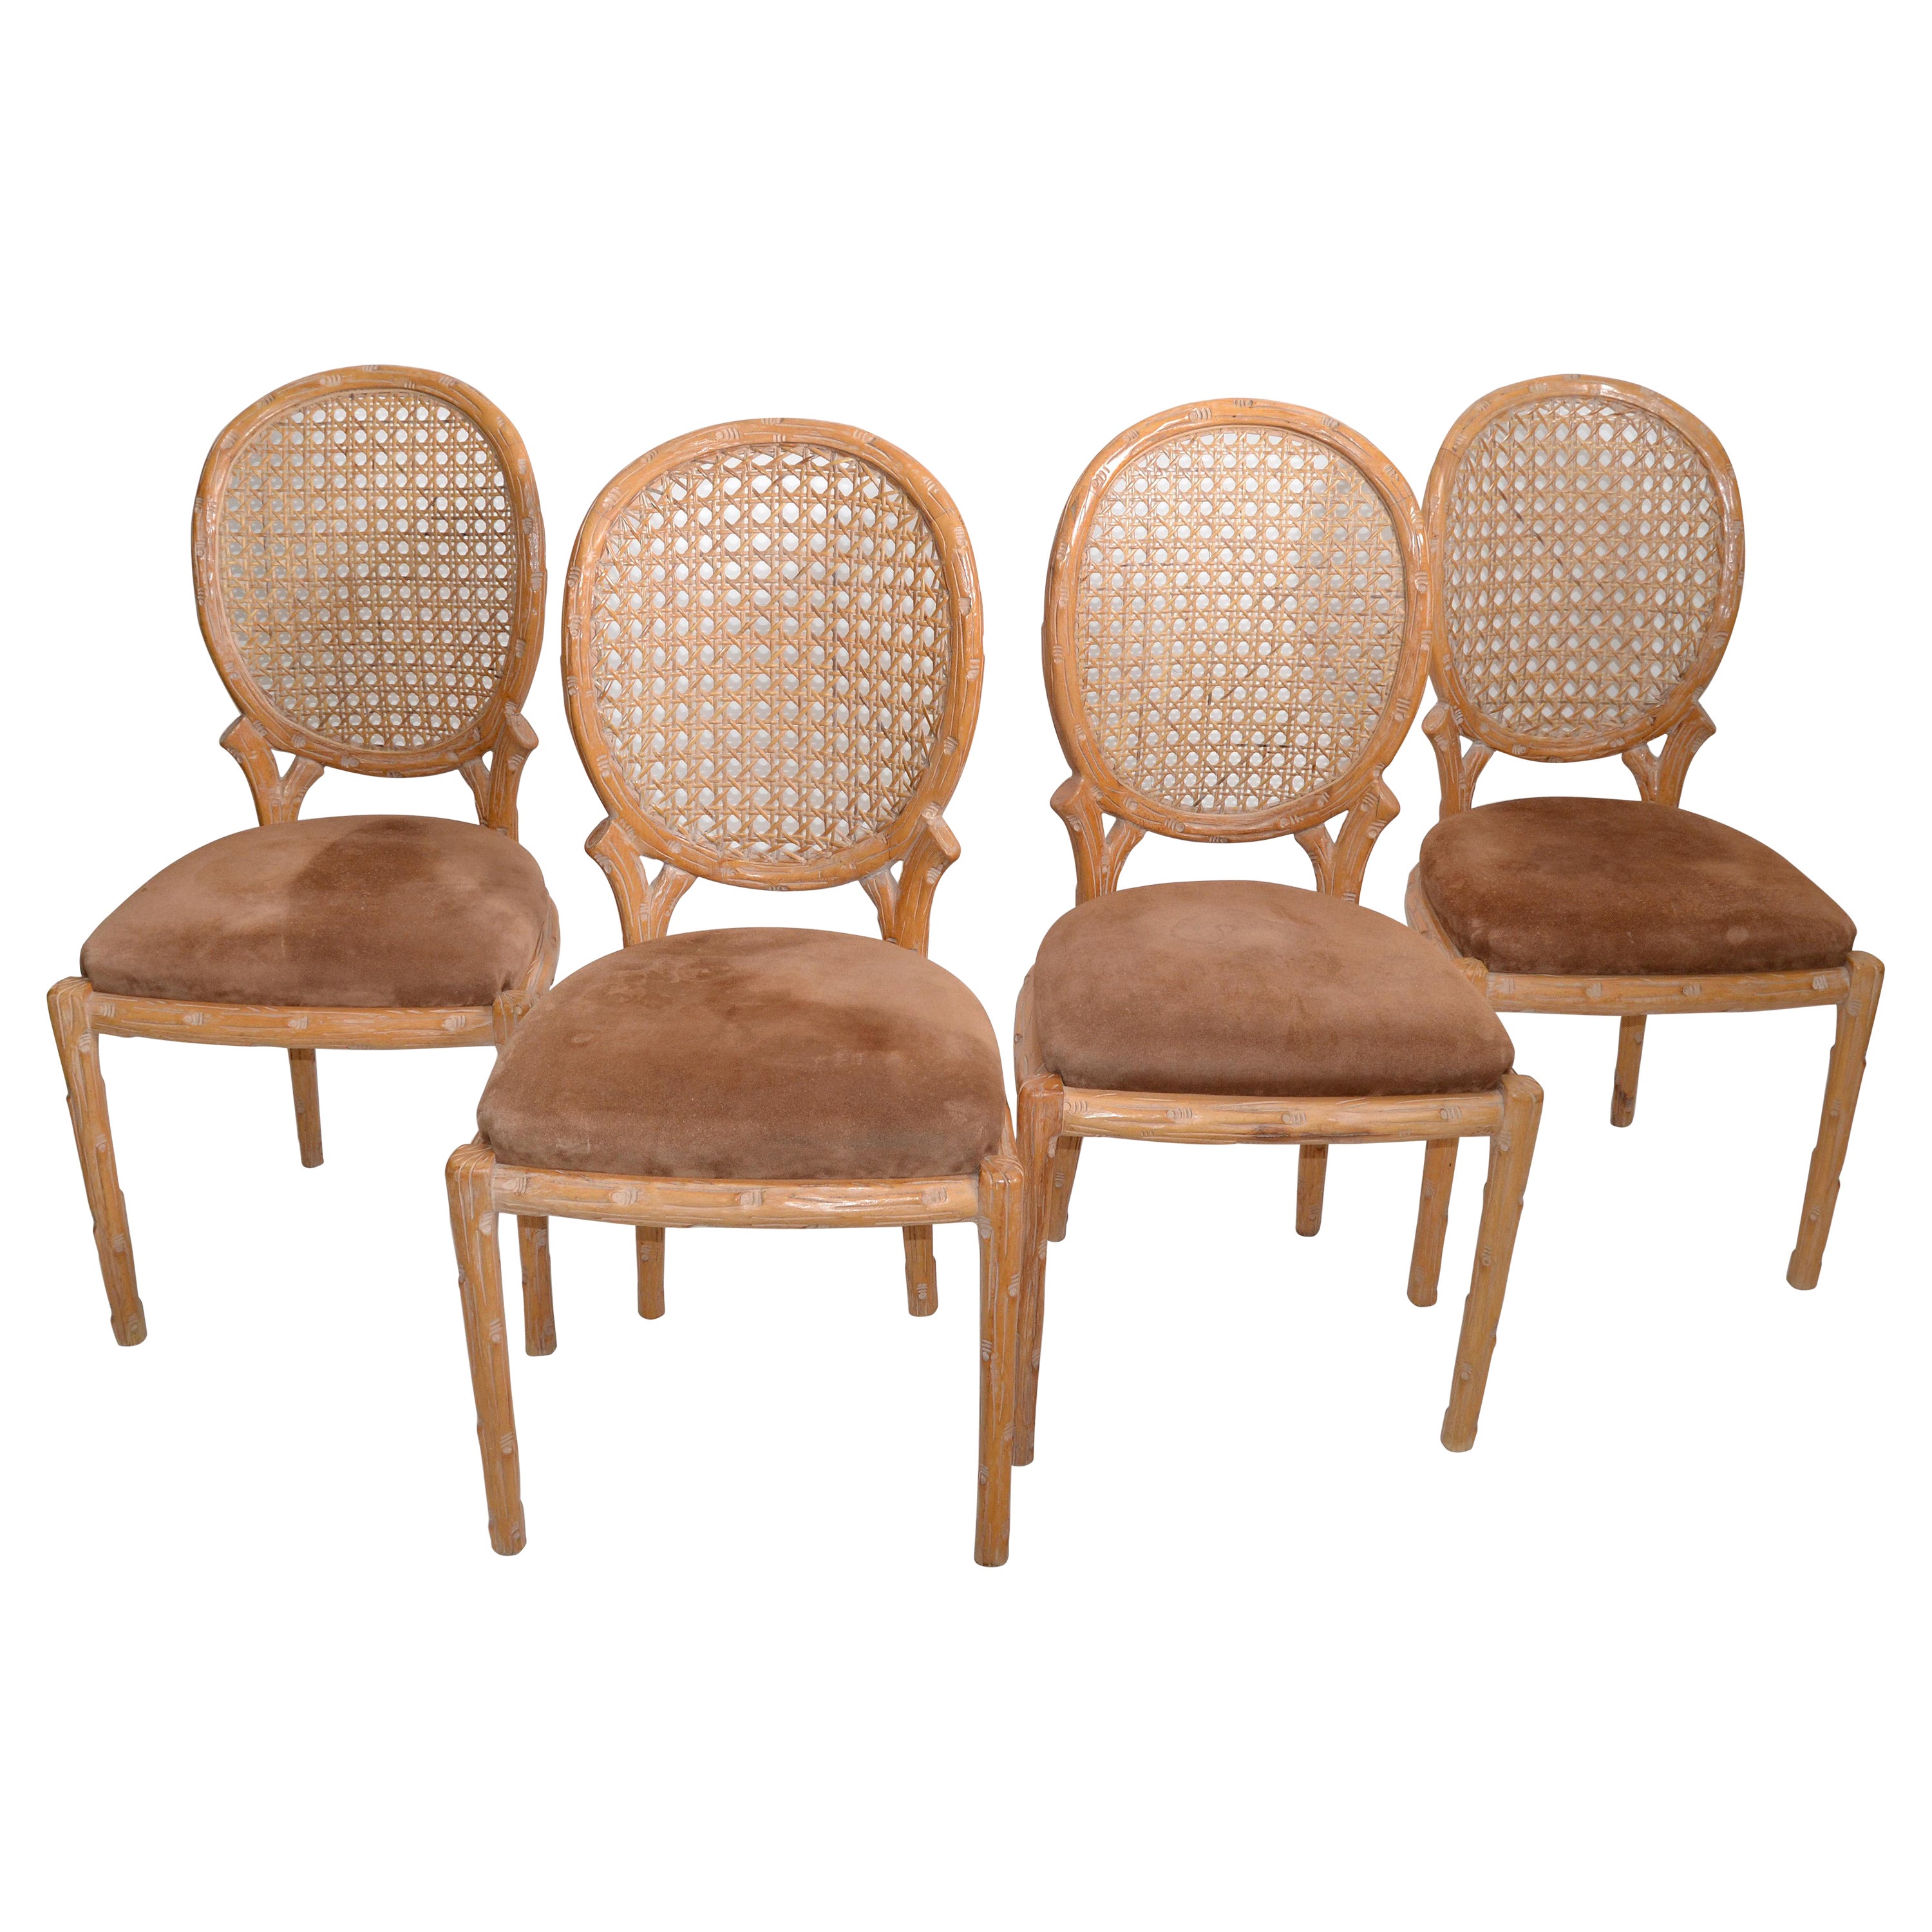 Set of 4 Fratelli Boffi Milano Wood & Cane Dining Chairs Mid-Century Modern 1970